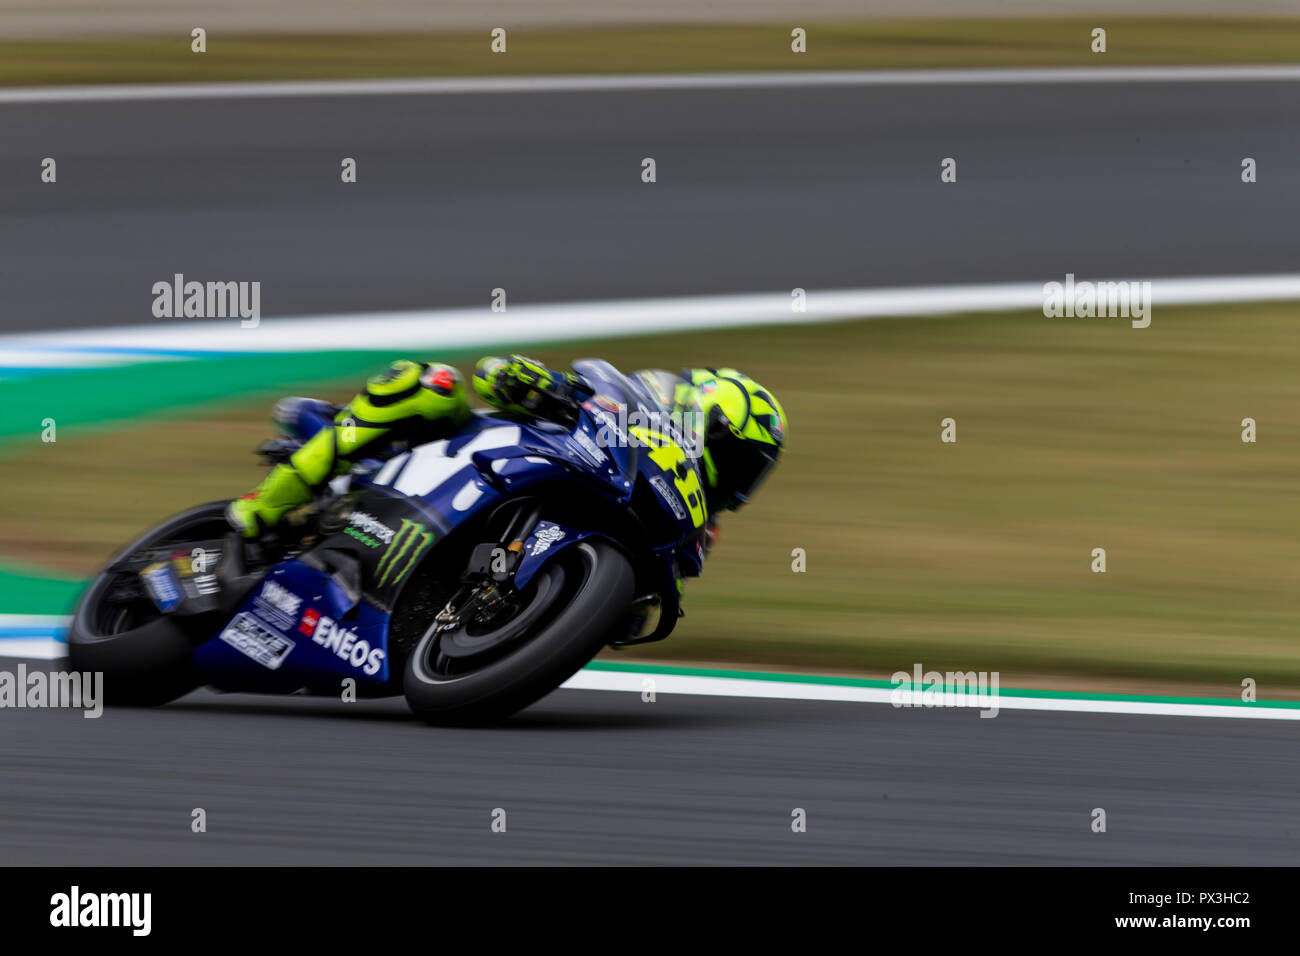 Motogp rider valentino rossi hi-res stock photography and images - Alamy